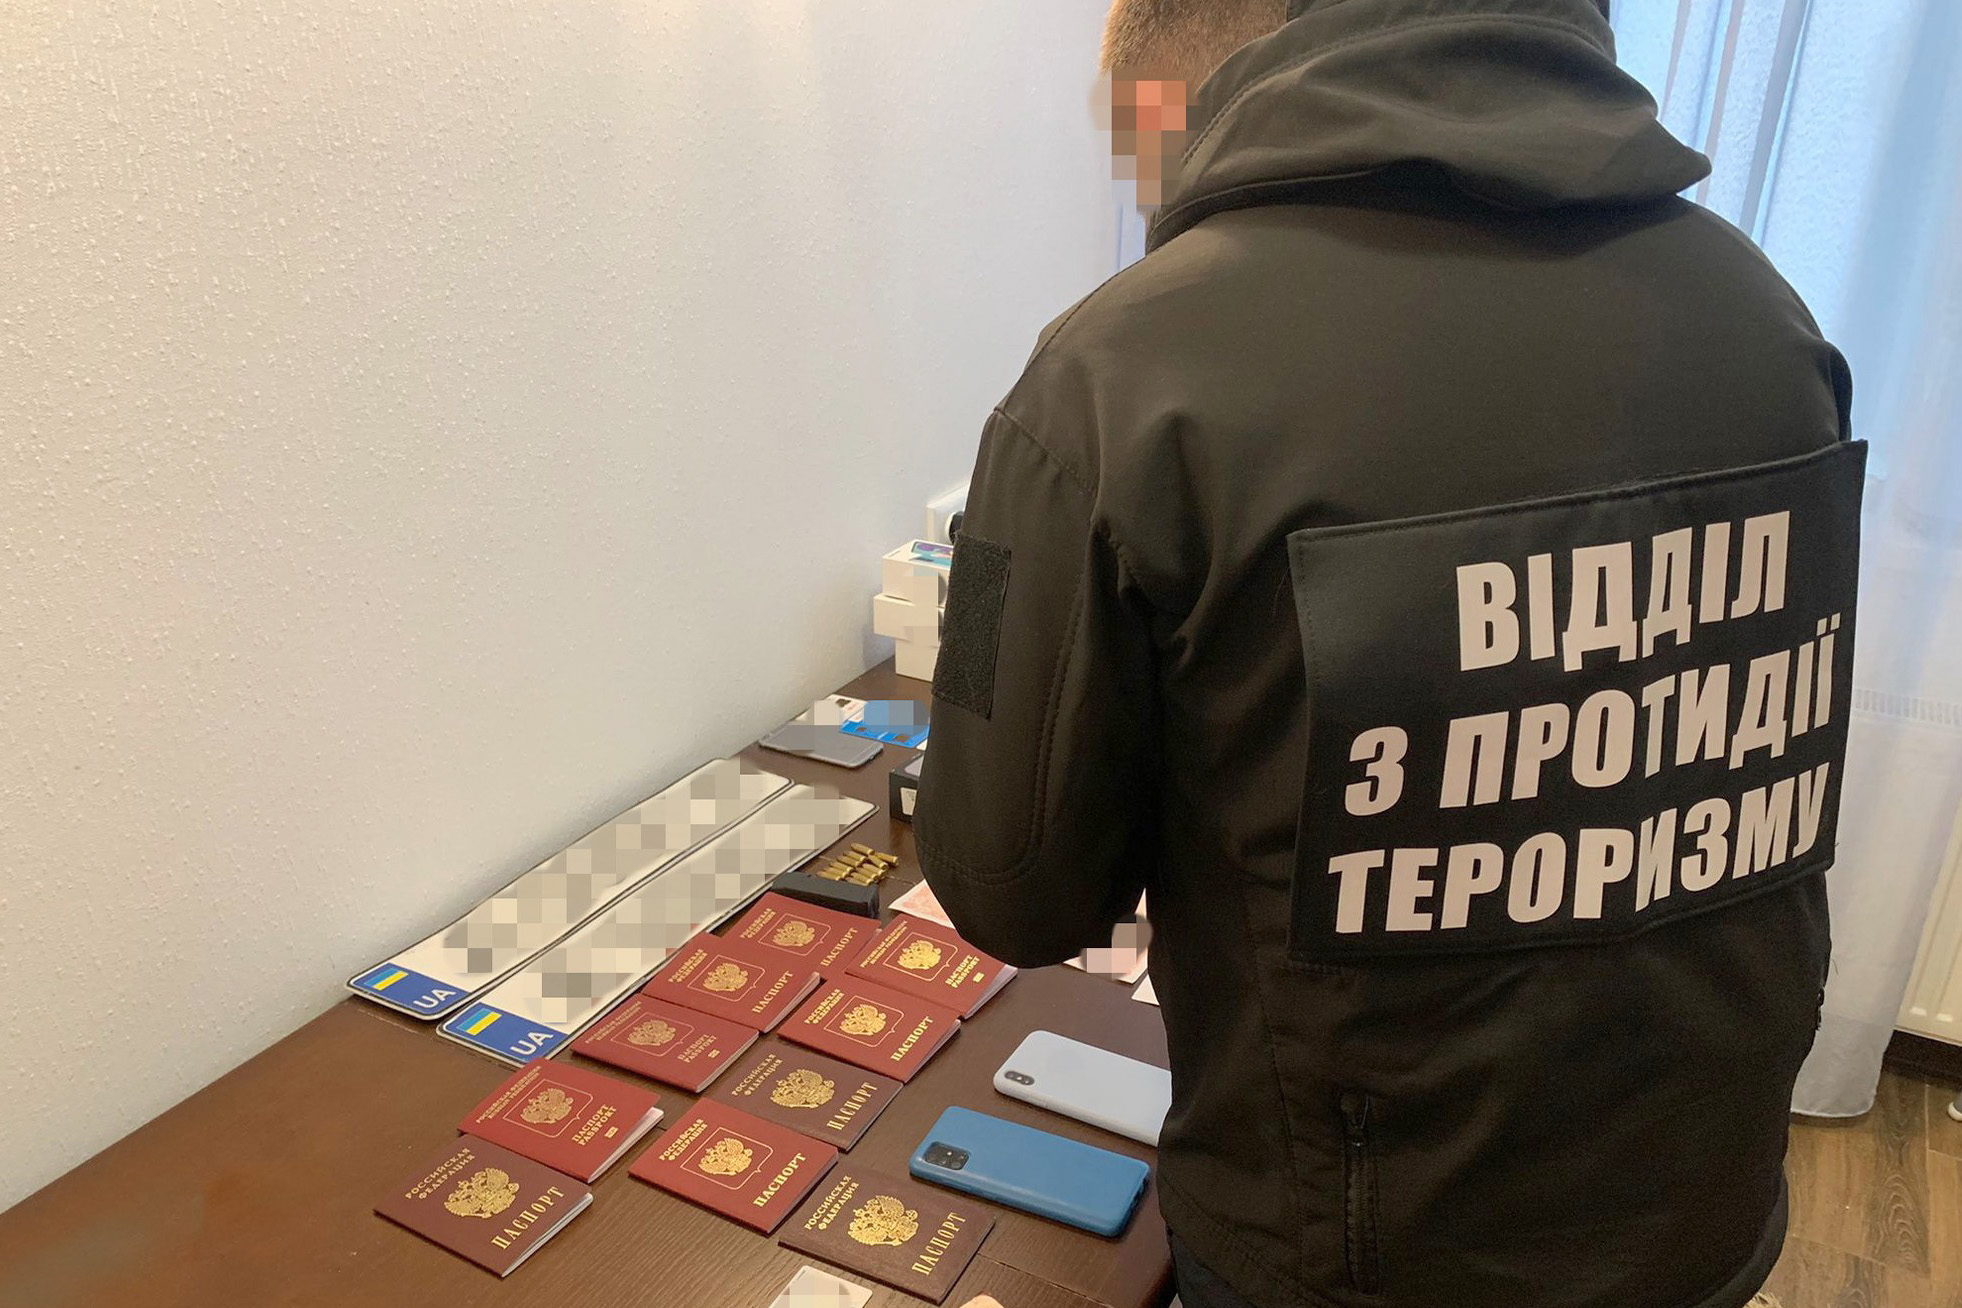 SBU busts Islamic State cell in Kyiv that could be led by top IS commander